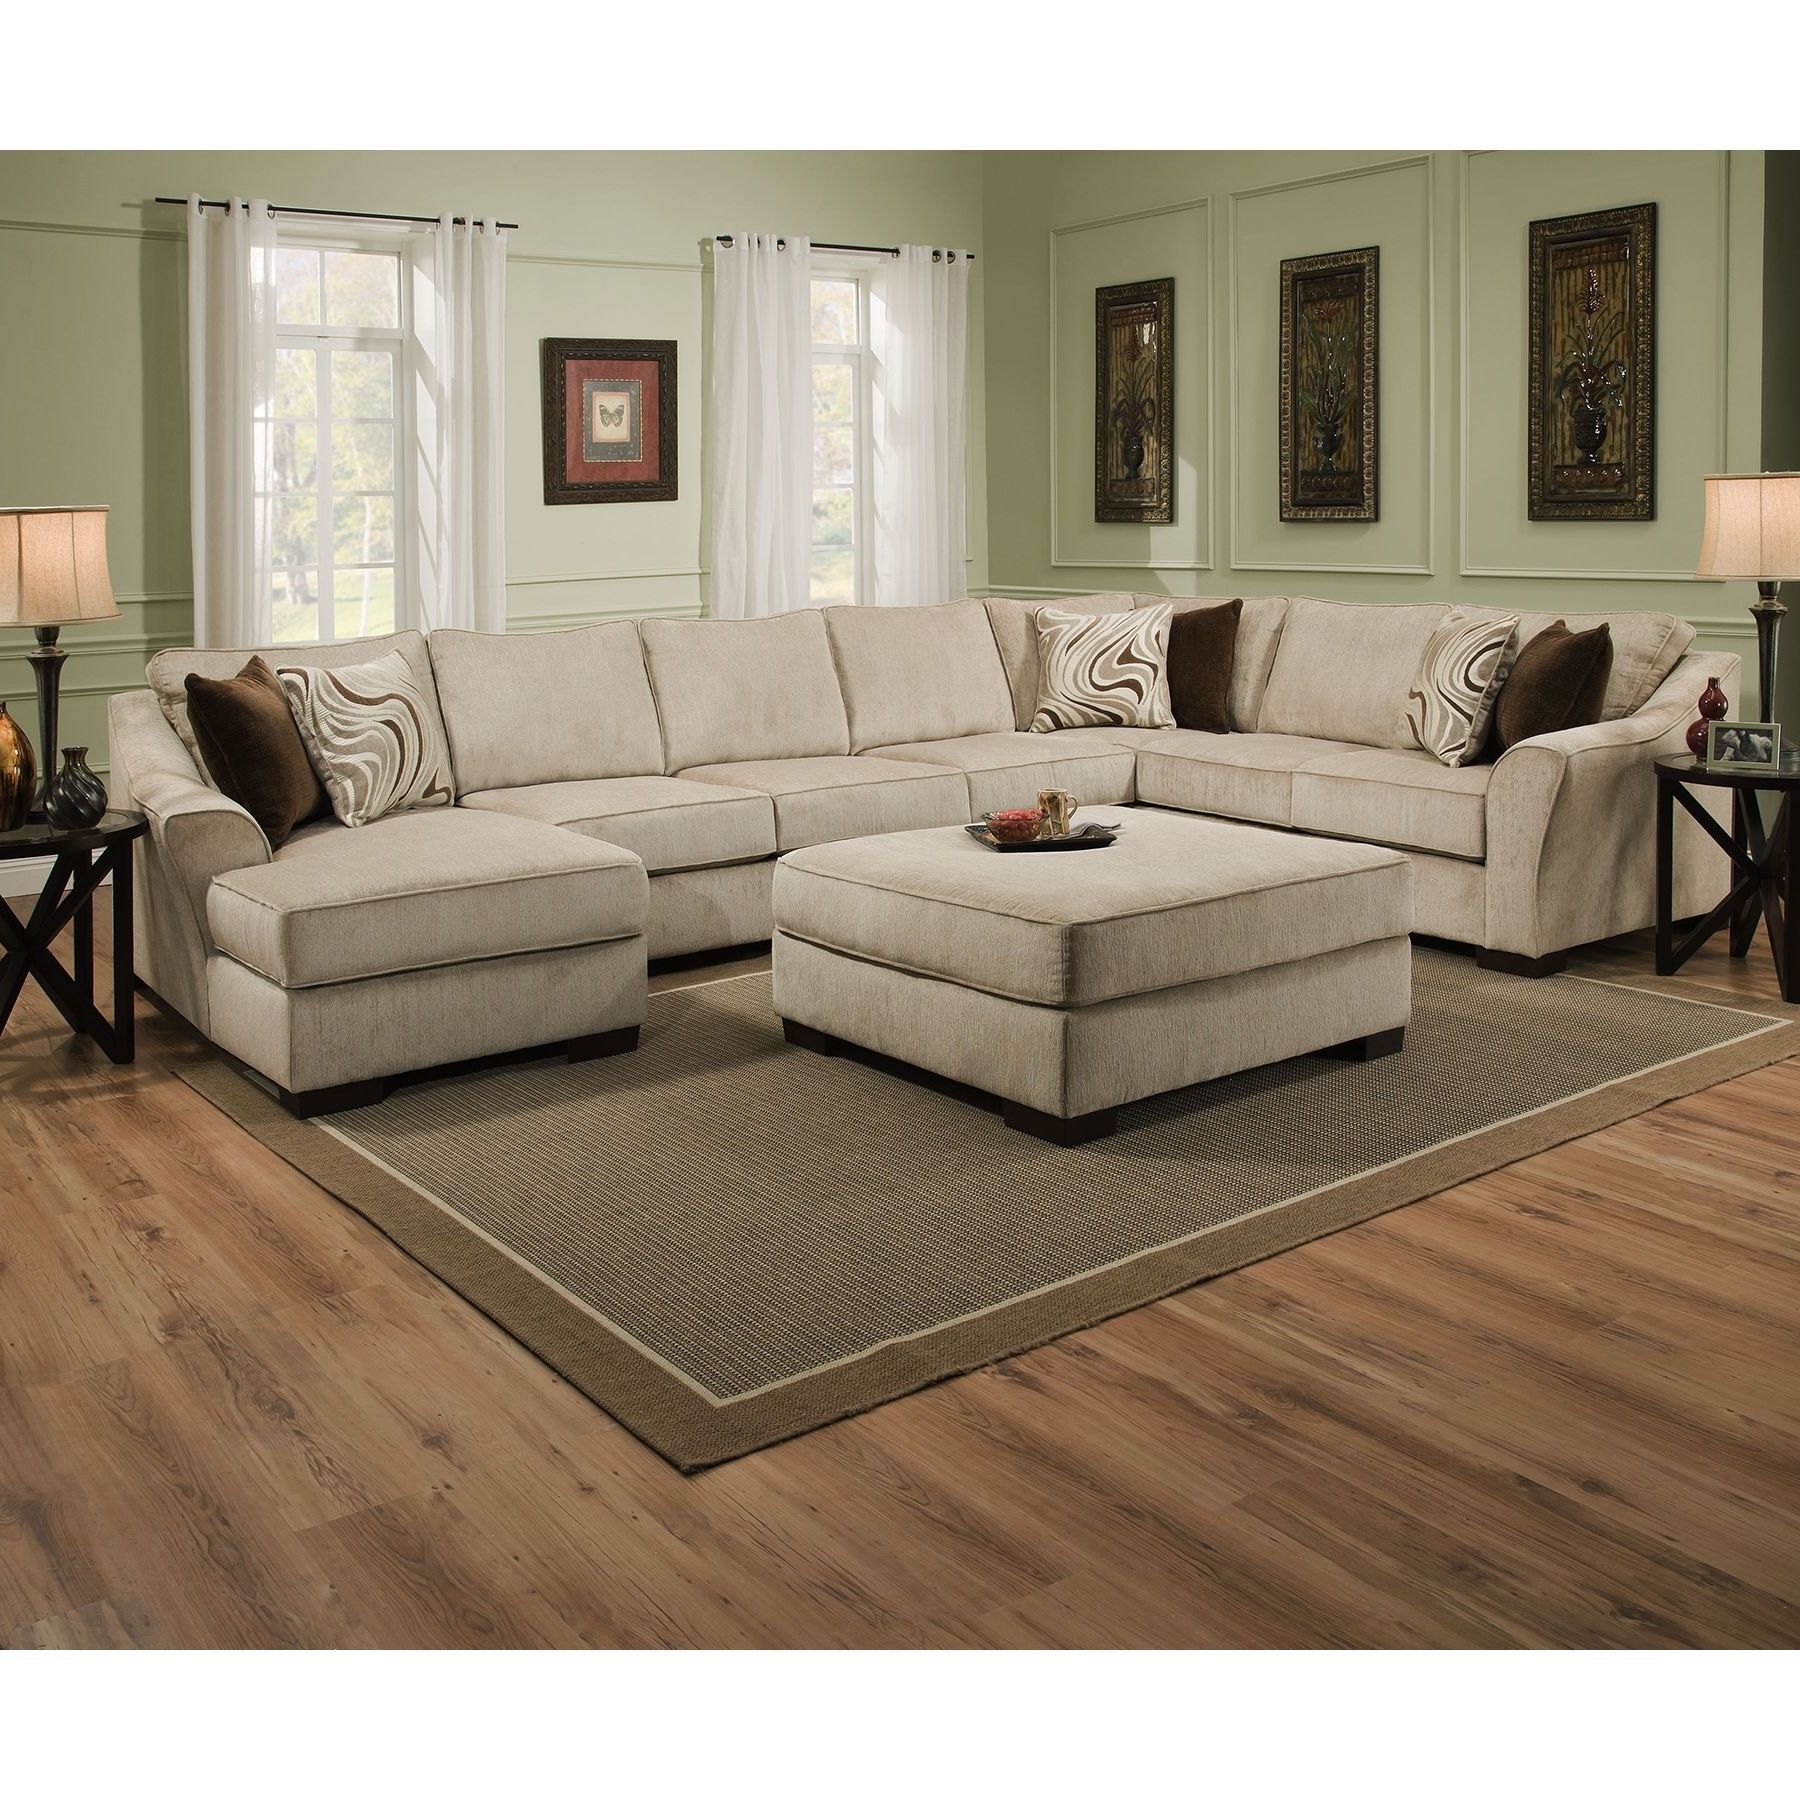 Preferred Furniture : Corner Sofa Kuwait Sectional Couch El Paso Sectional With Regard To El Paso Sectional Sofas (View 8 of 20)